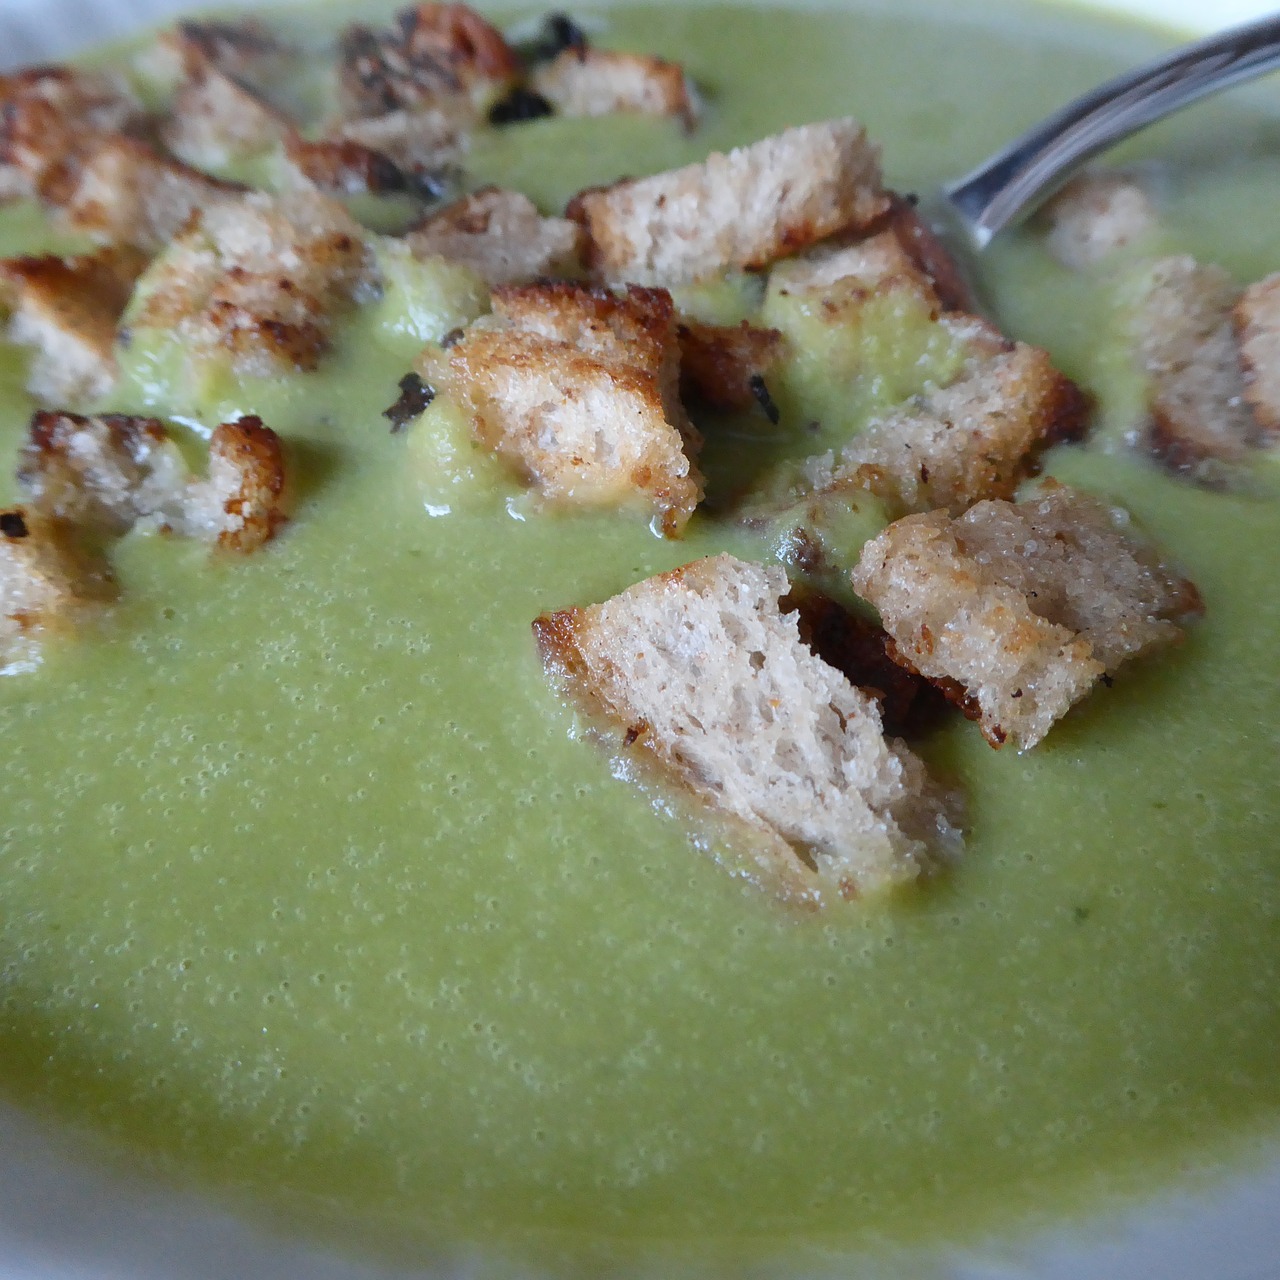 Cool Strawberry Soup with Pound Cake Croutons